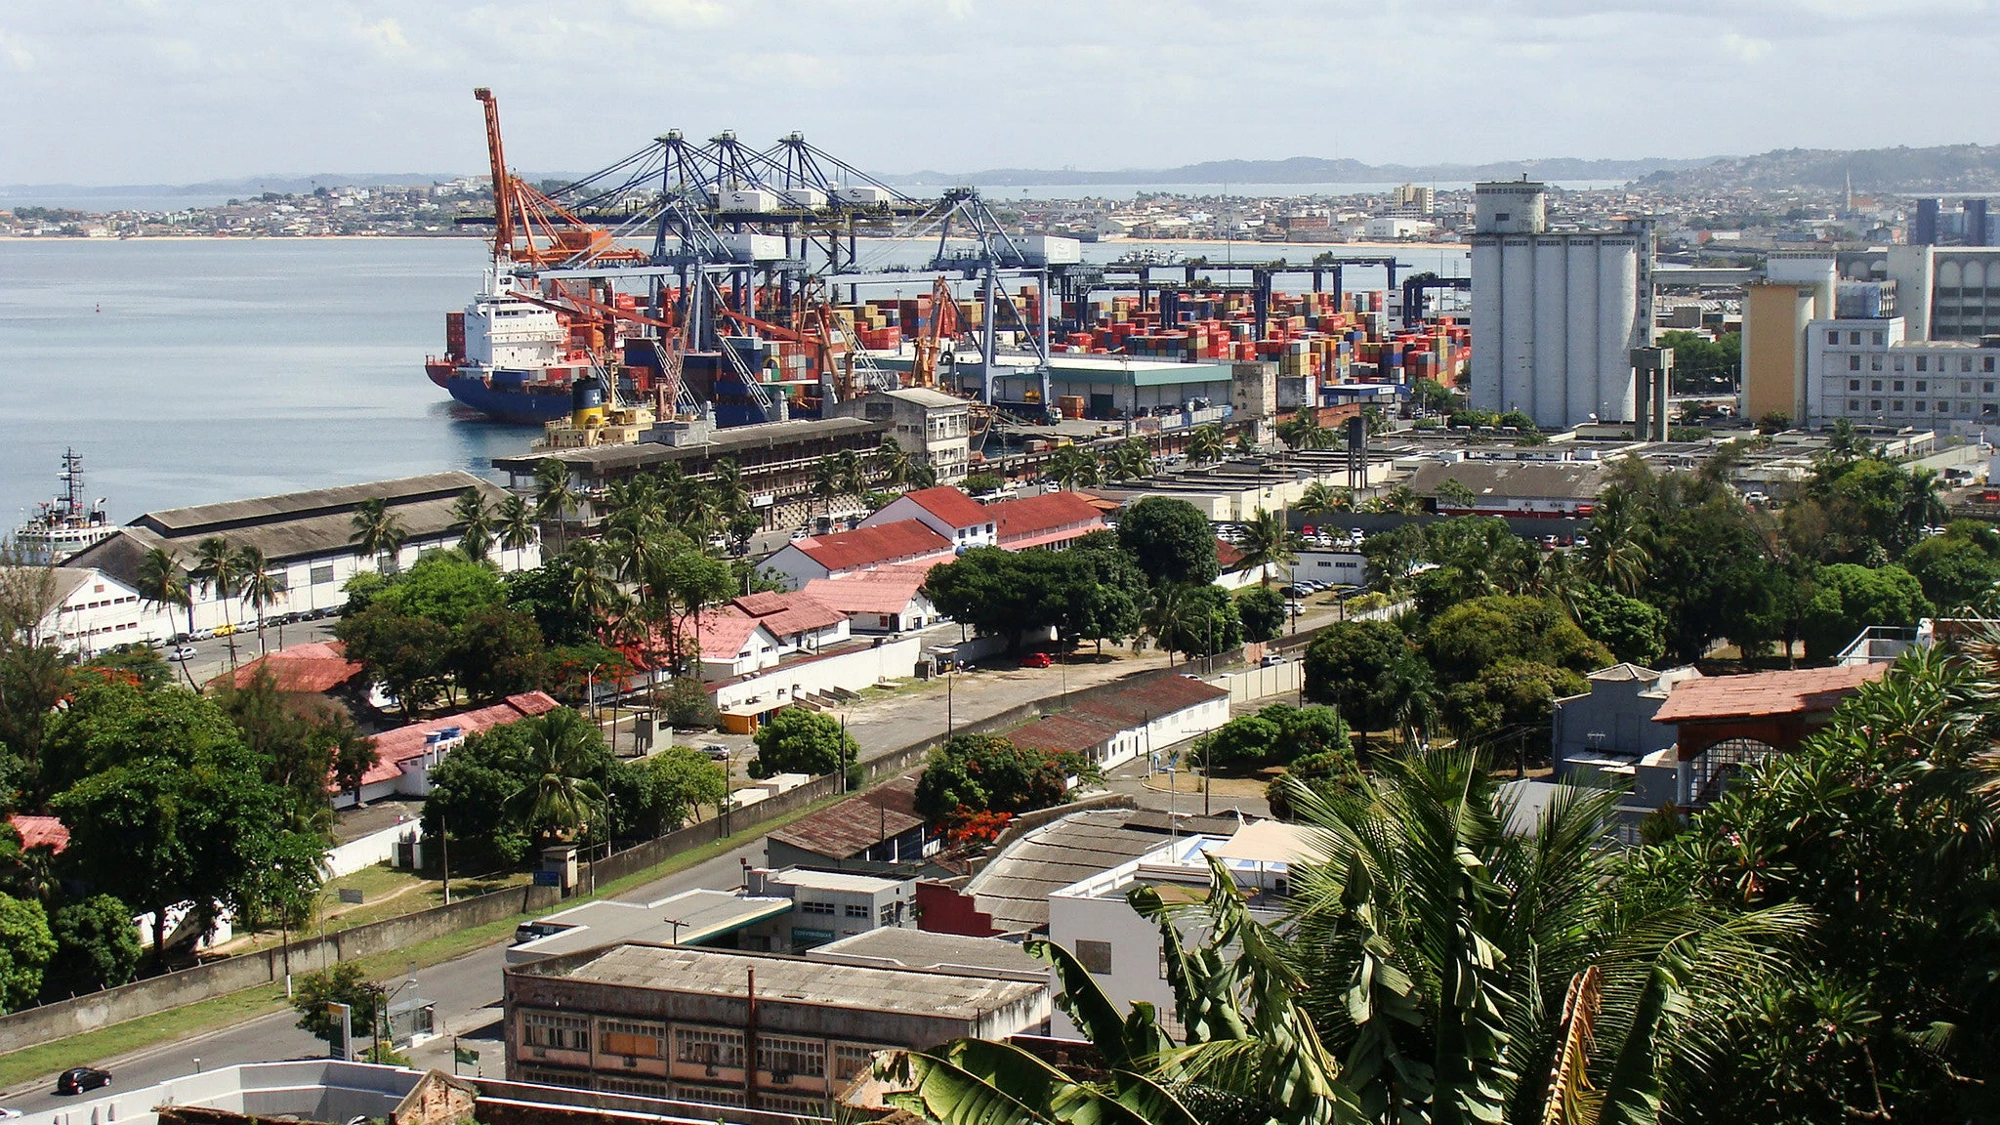 The Port of Salvador in All Saints Bay, Brazil